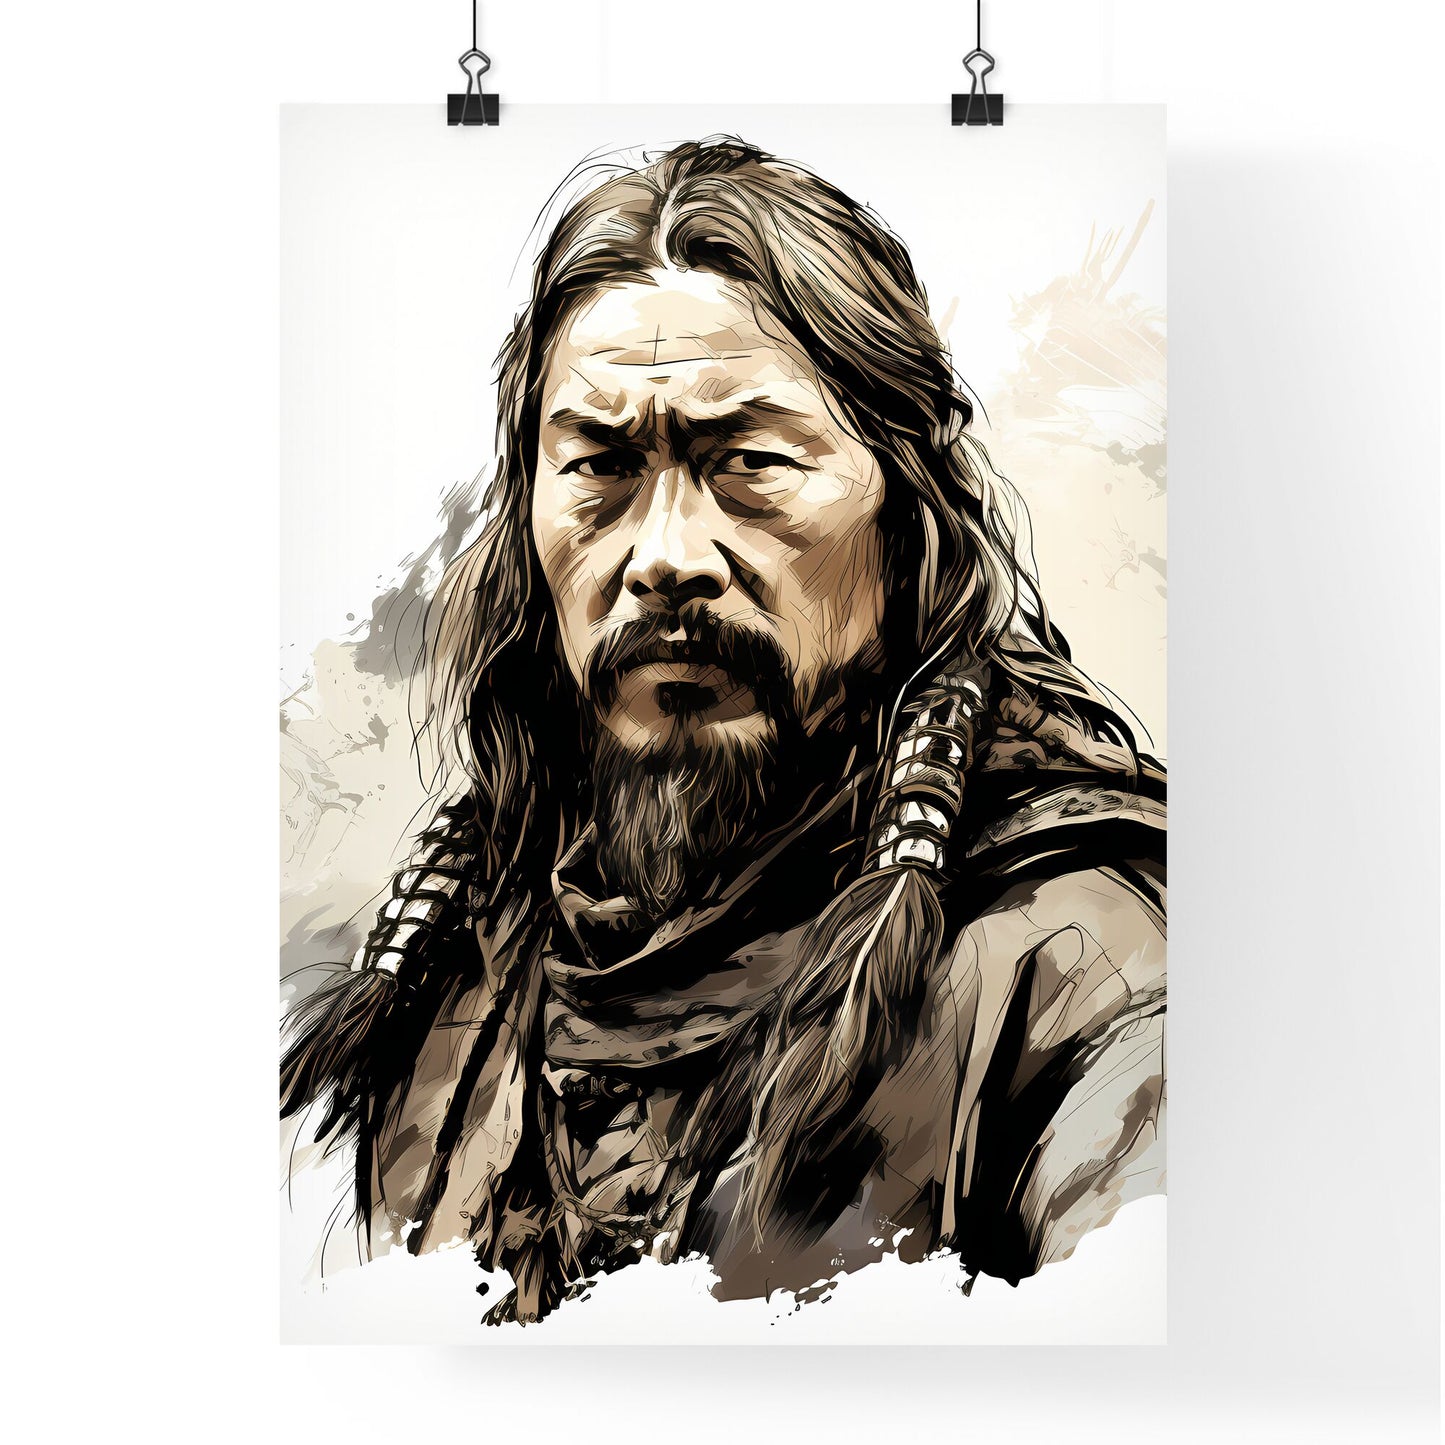 Genghis Khan Founder Of The Mongol Empire - A Man With Long Hair And A Beard Default Title